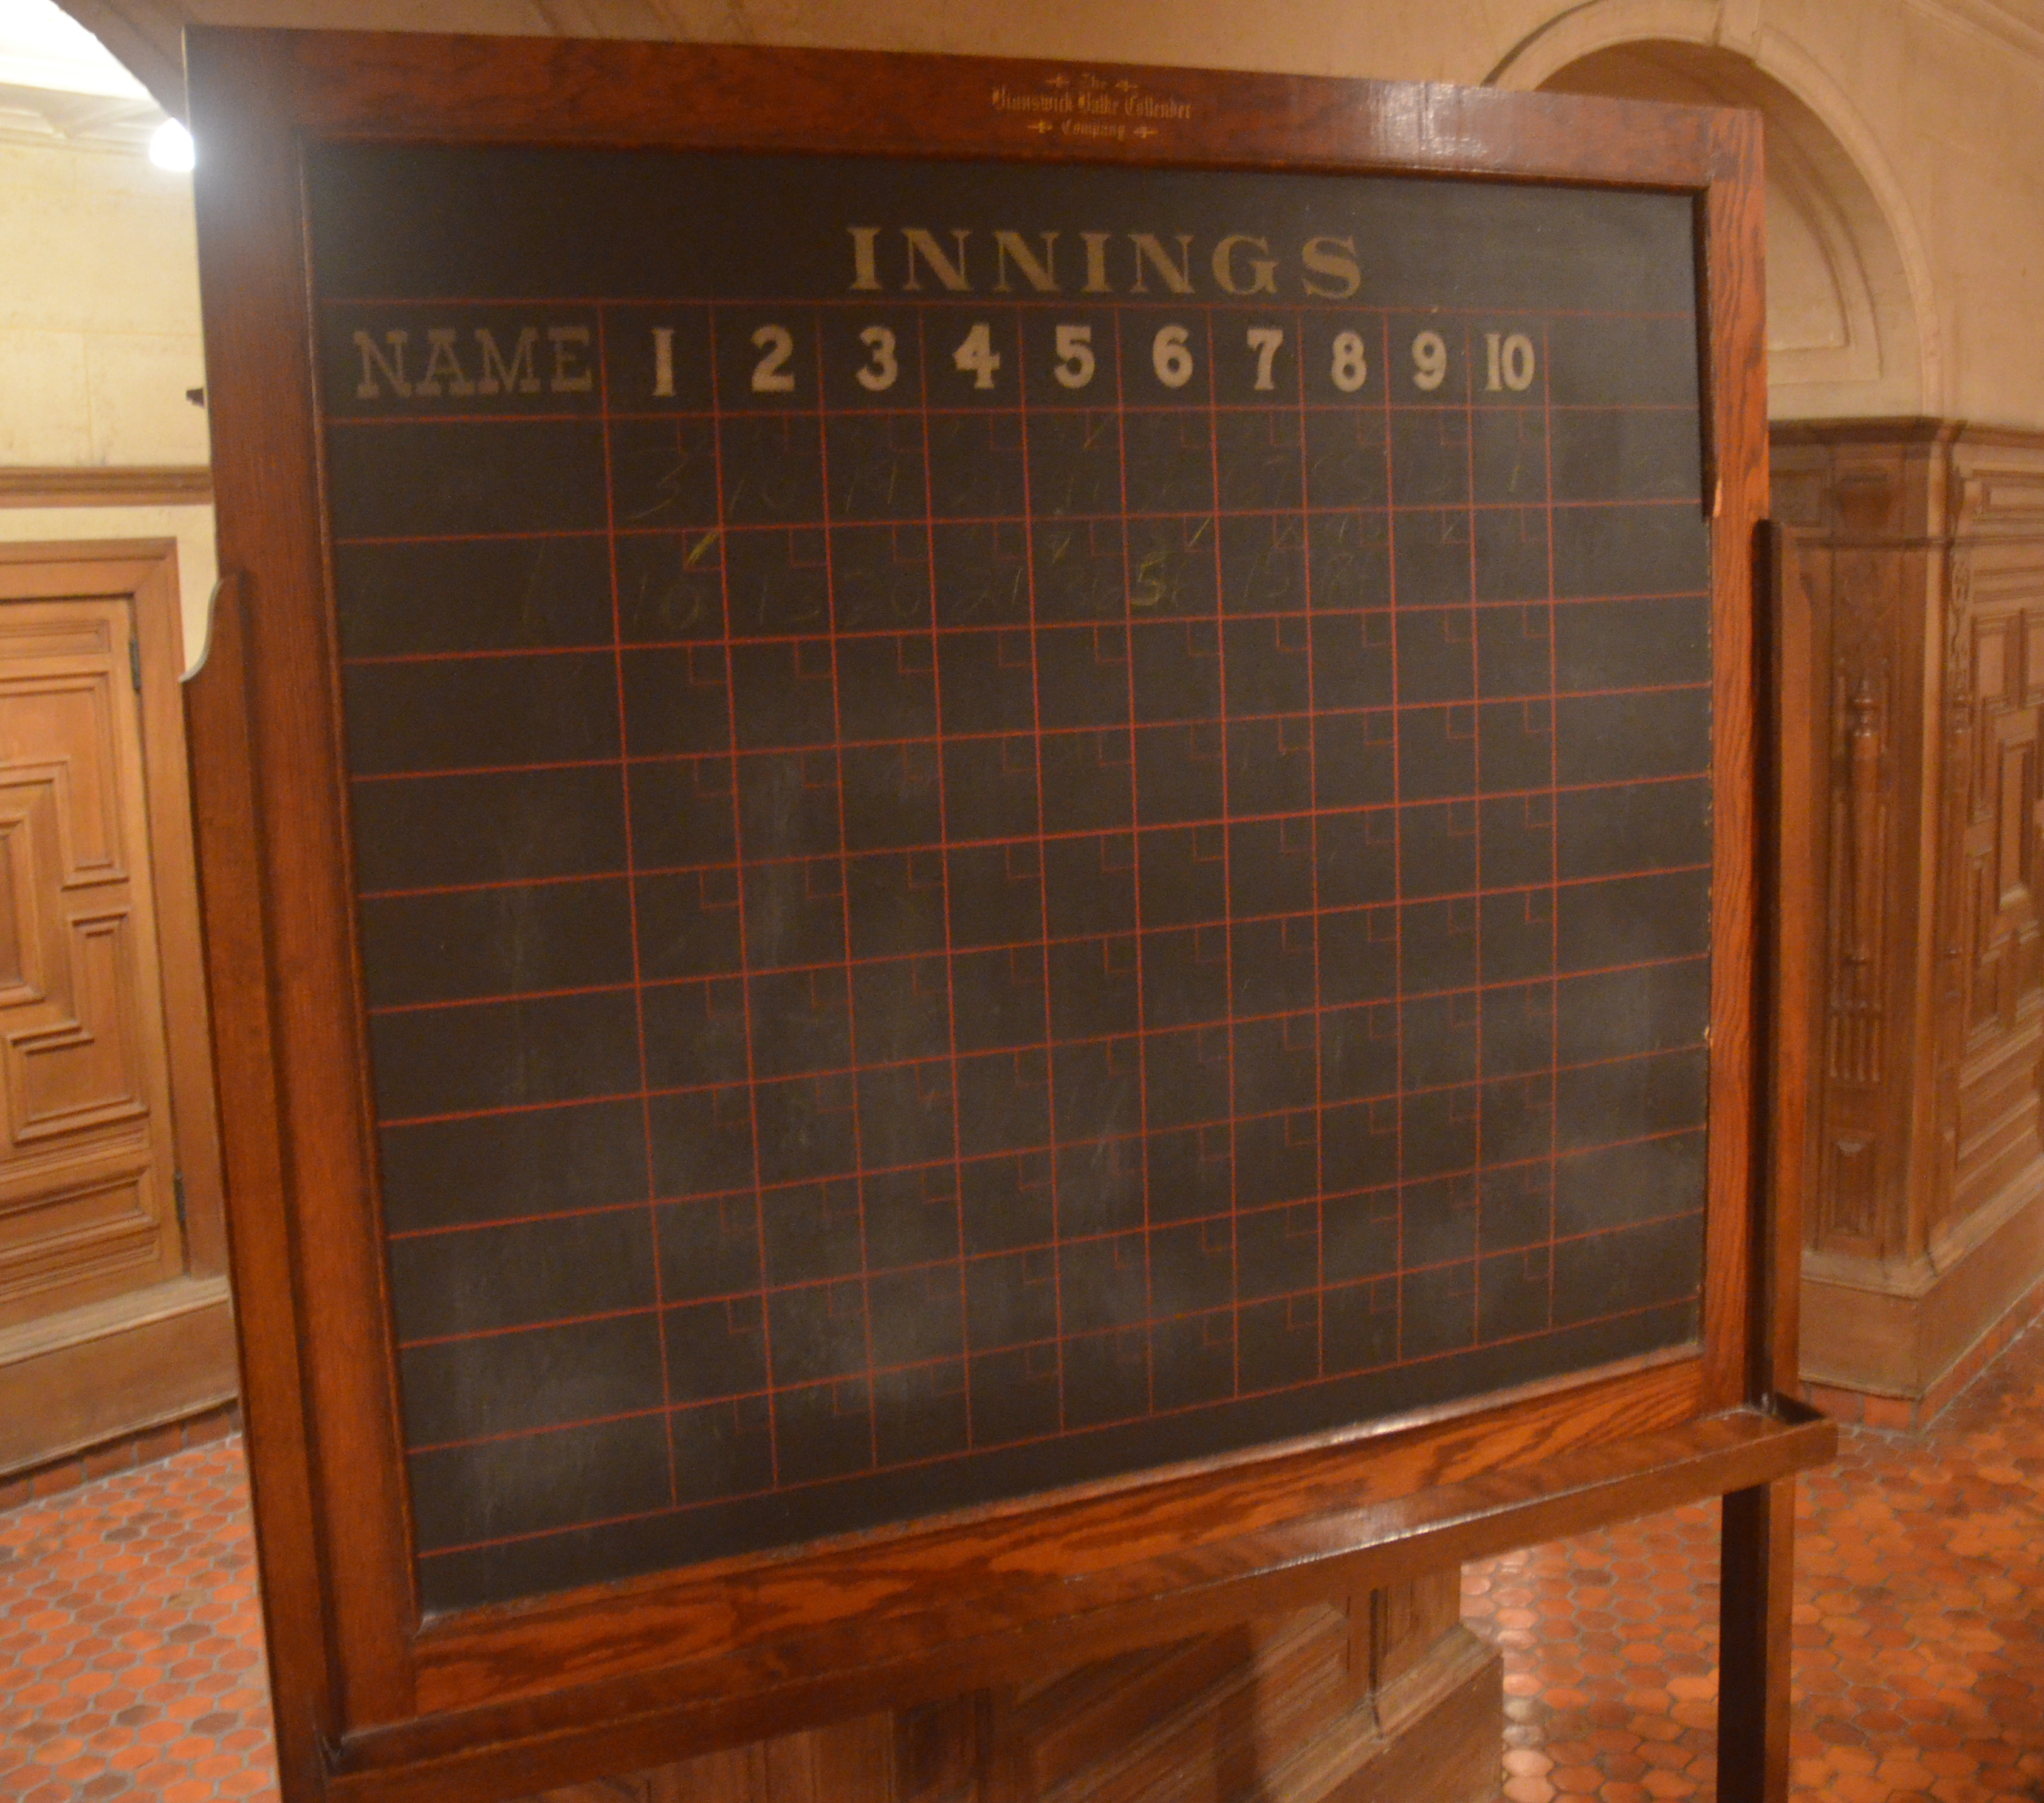 Scoreboard at the bowling alley at the Frick Collection as seen in late 2012 (credit: Evan Bindelglass / CBSNewYork)